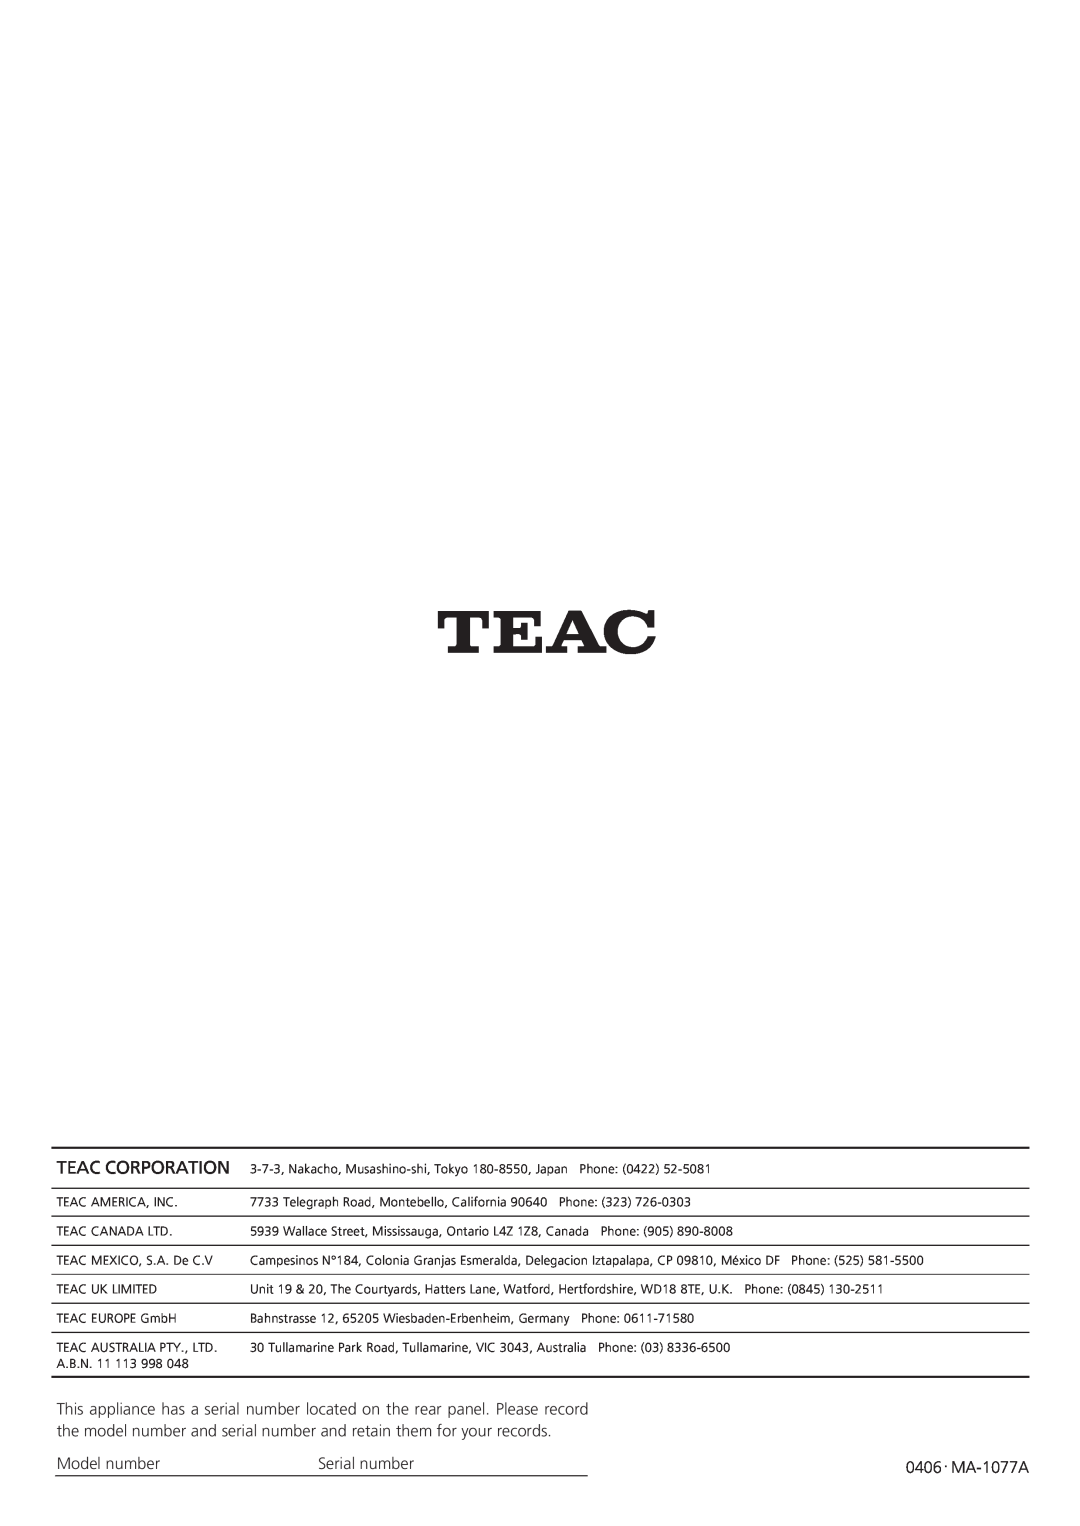 Teac A-R610 owner manual Teac Corporation, Model number, Serial number 